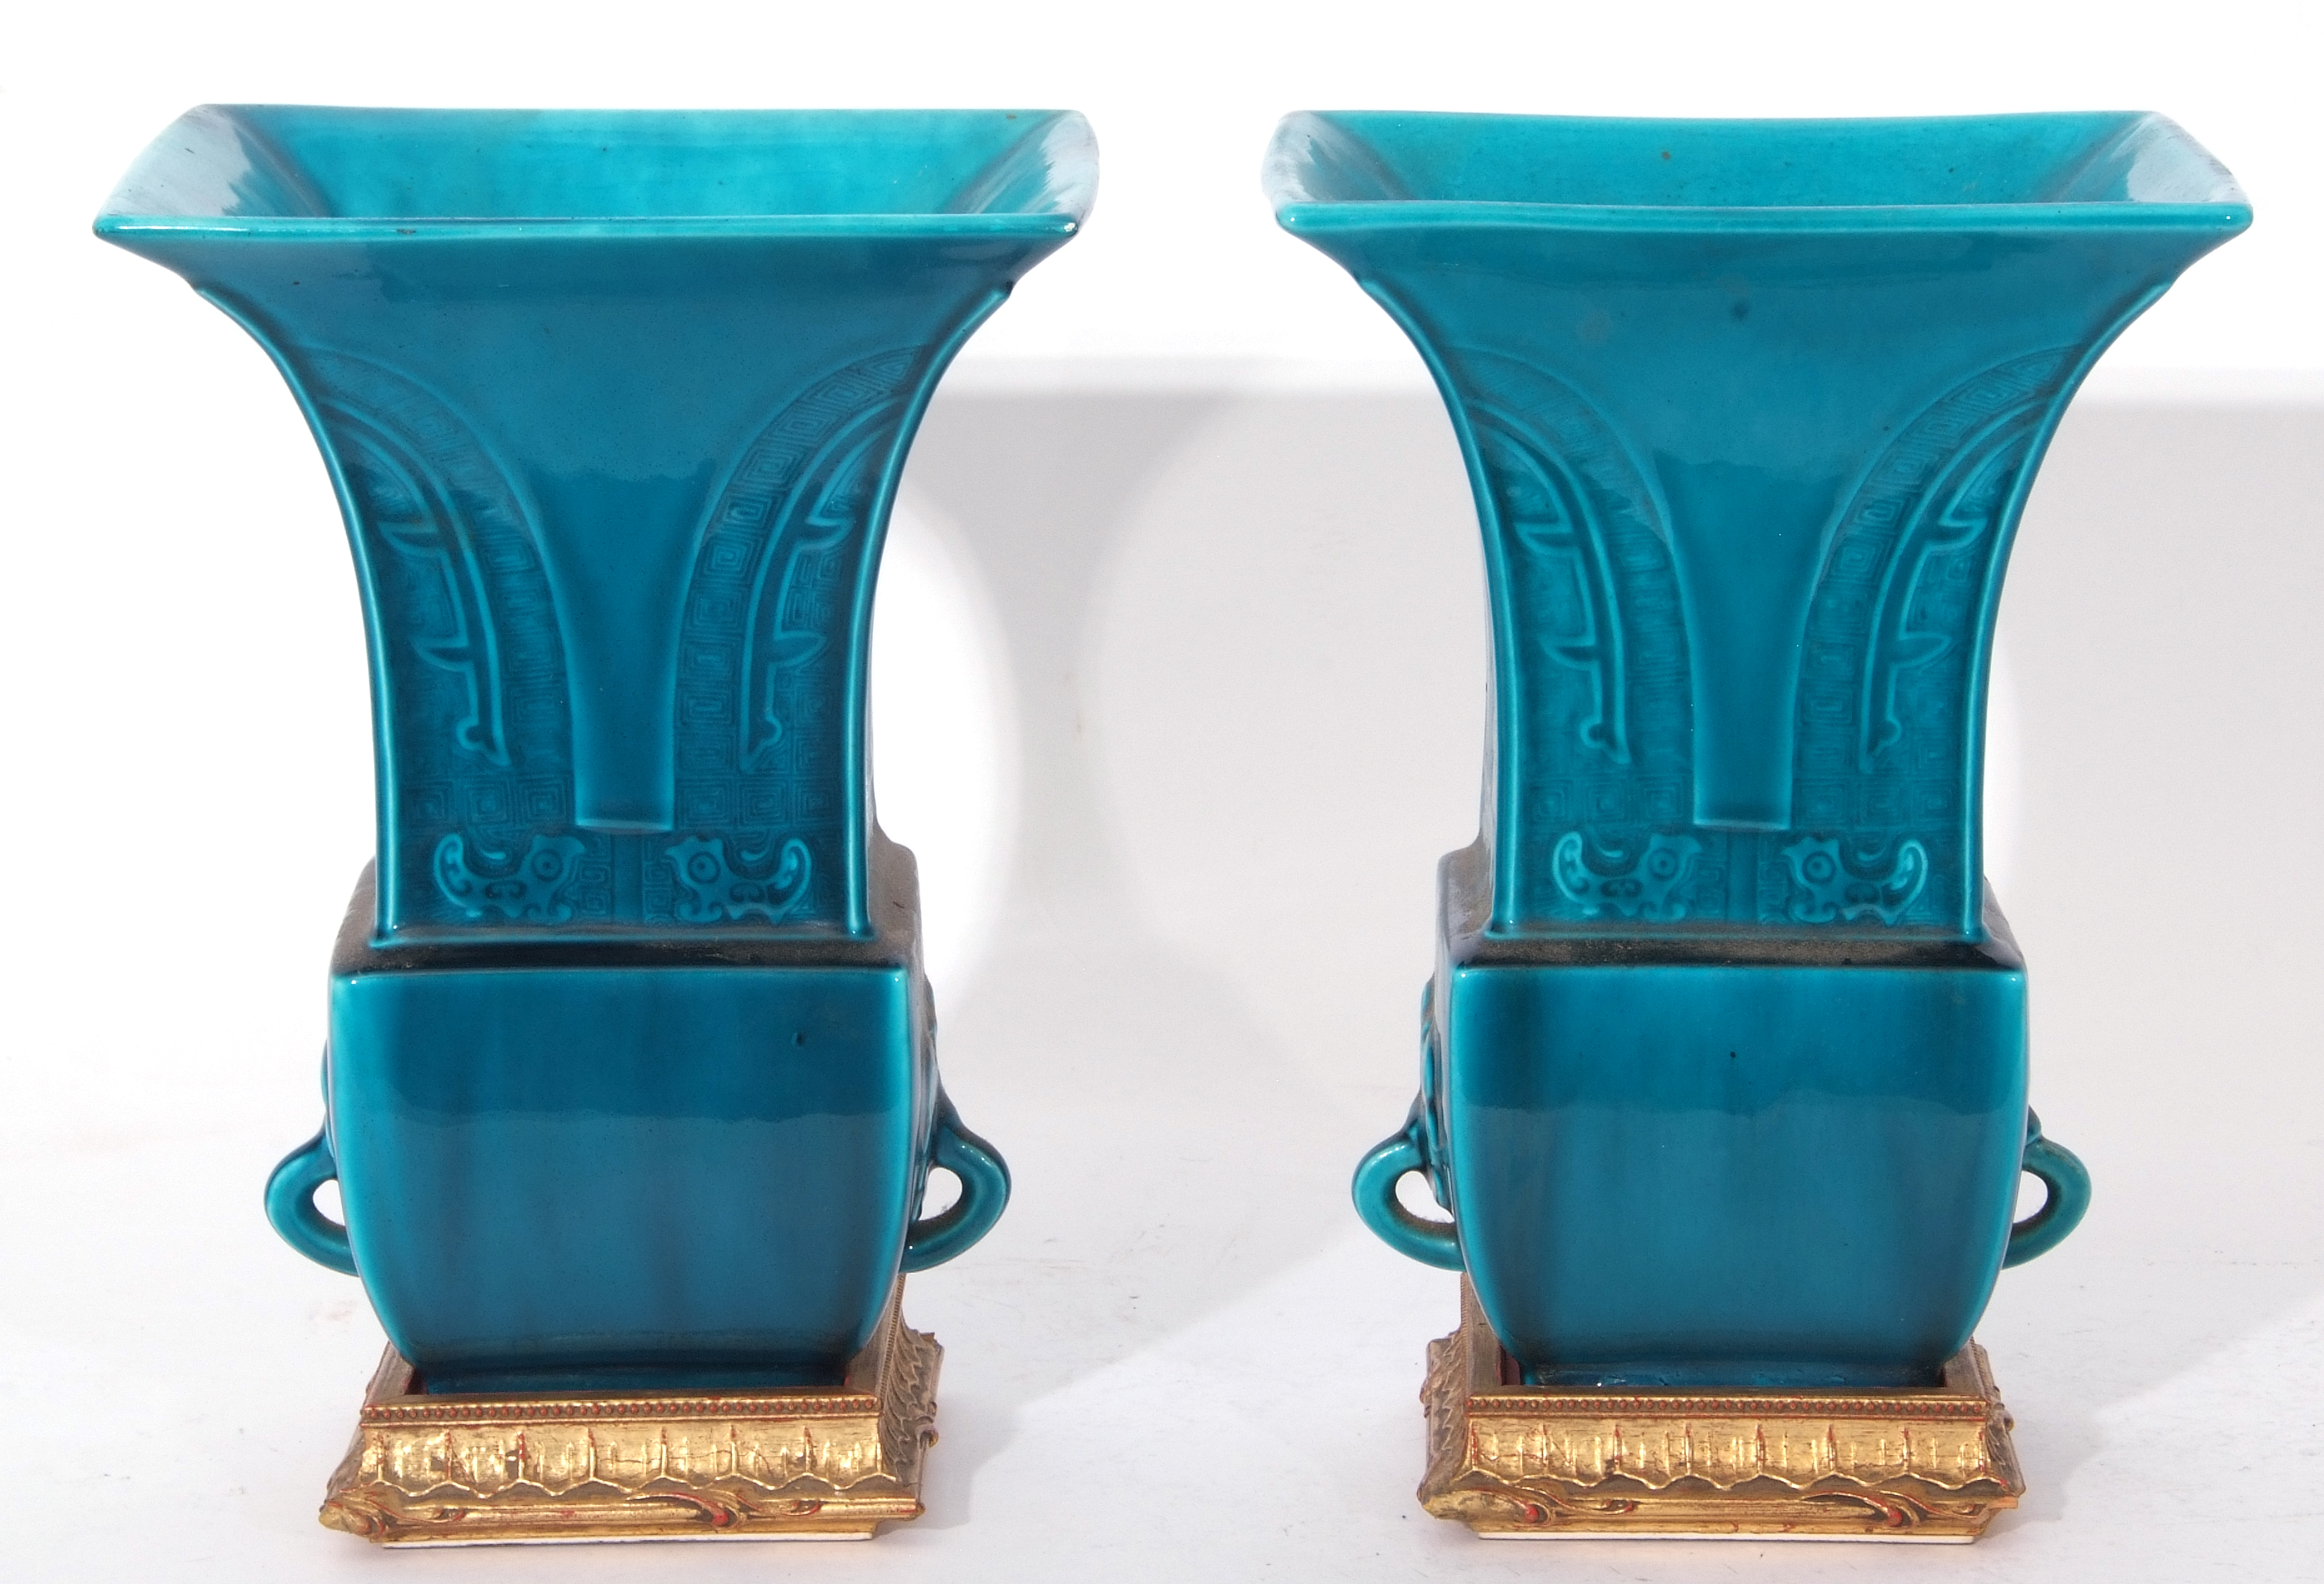 Pair of Theodore Deck blue faience vases of archaic Chinese form decorated with a geometric - Image 5 of 8